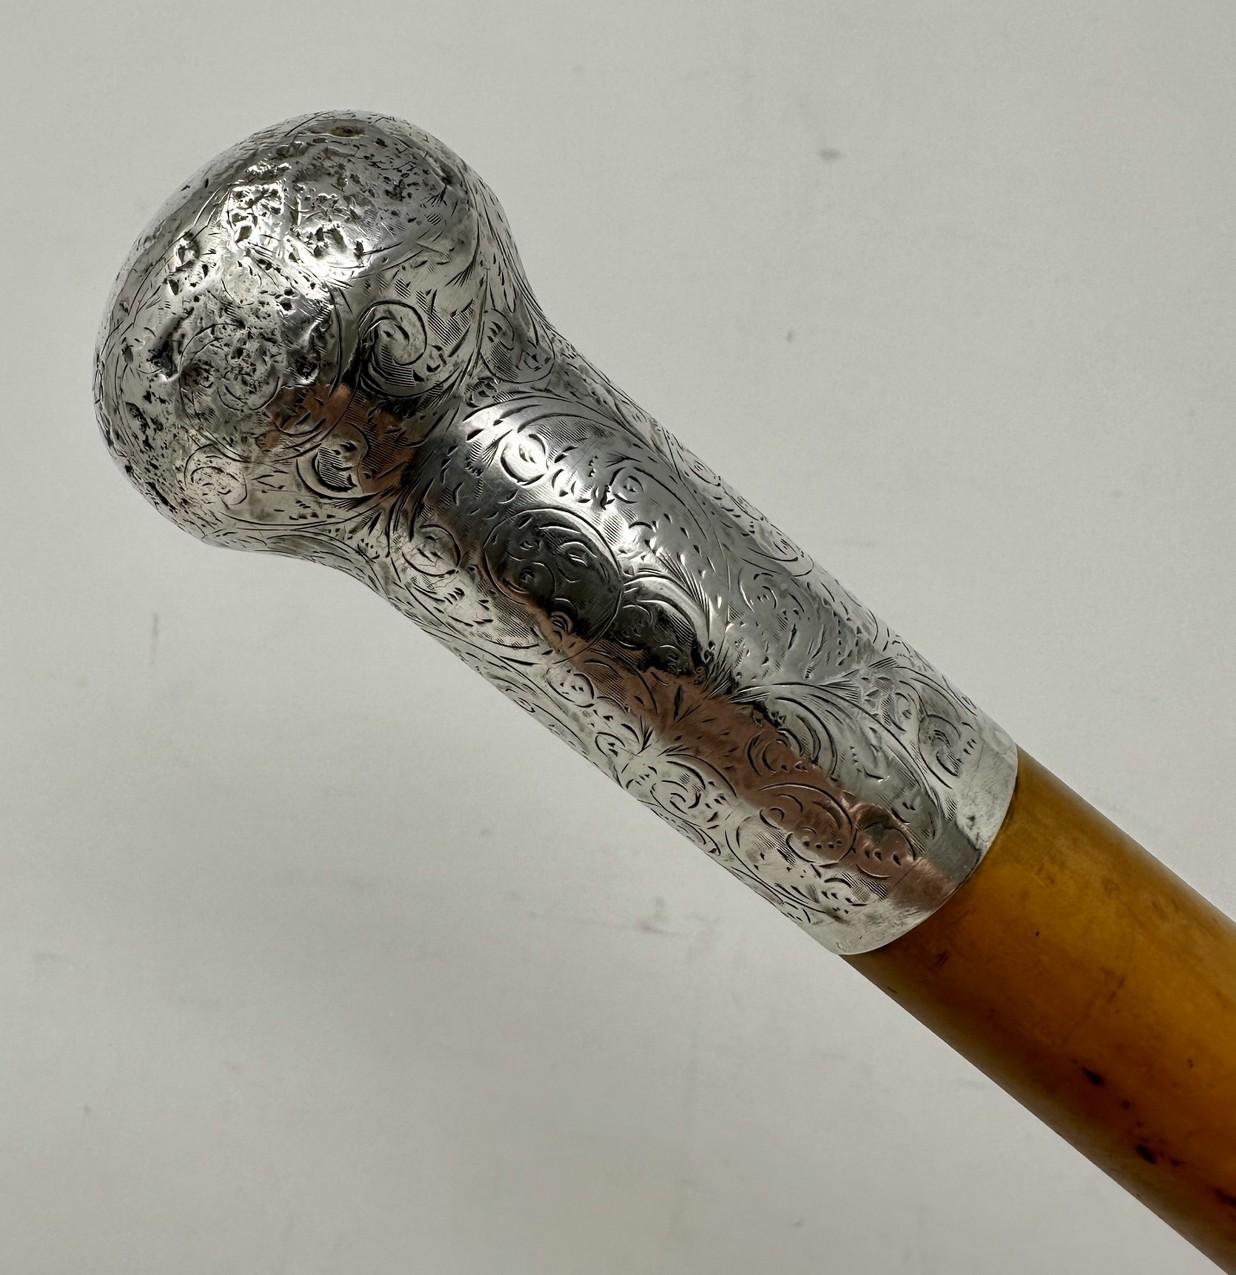 Victorian Antique Malacca Wooden English Walking Swagger Stick Cane Sterling Silver London